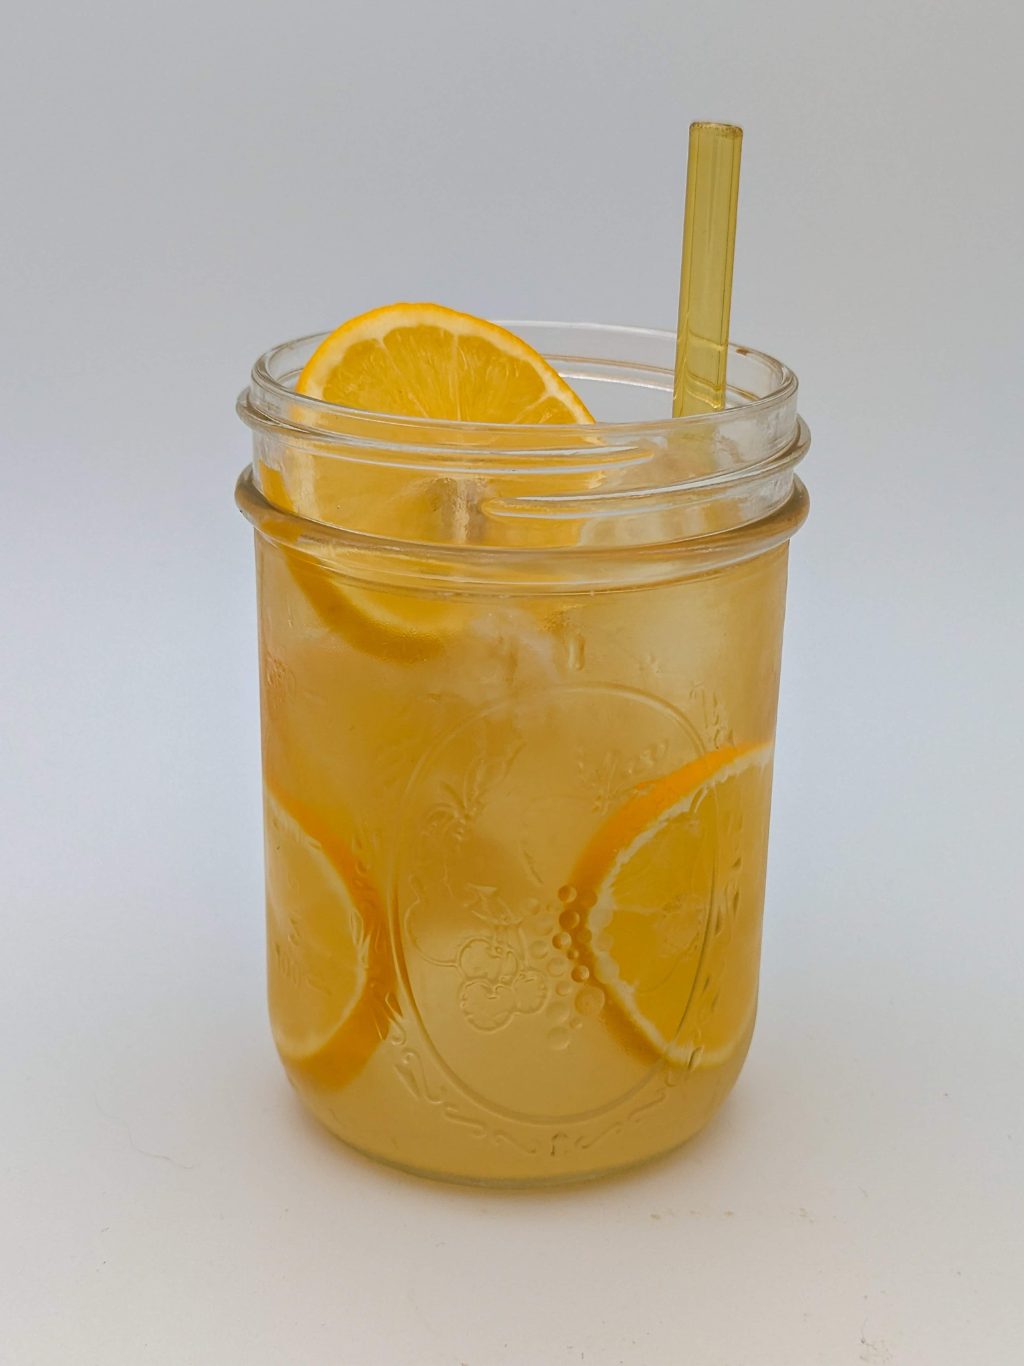 gold liquid in a glass jar filled with ice garnished with lemon wheels